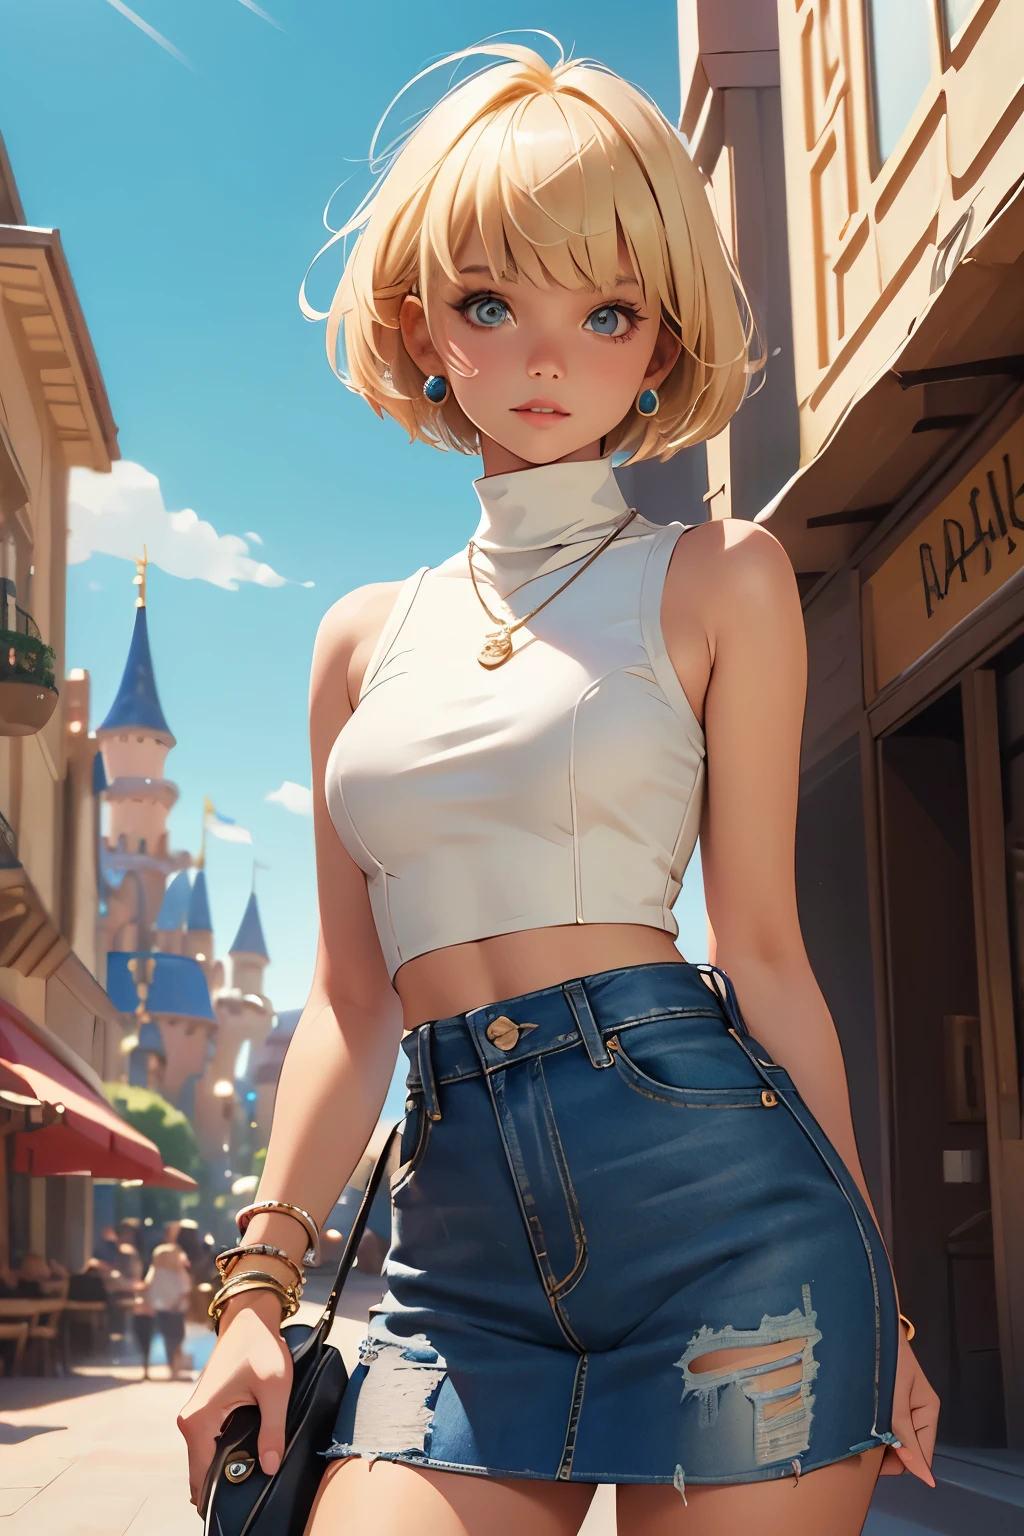 Teenage girl, blond pixie cut hair with bangs, wearing turtleneck sleeveless crop top and cropped denim mini skirt, bracelets, necklaces, summer outfit, Disneyland vibes